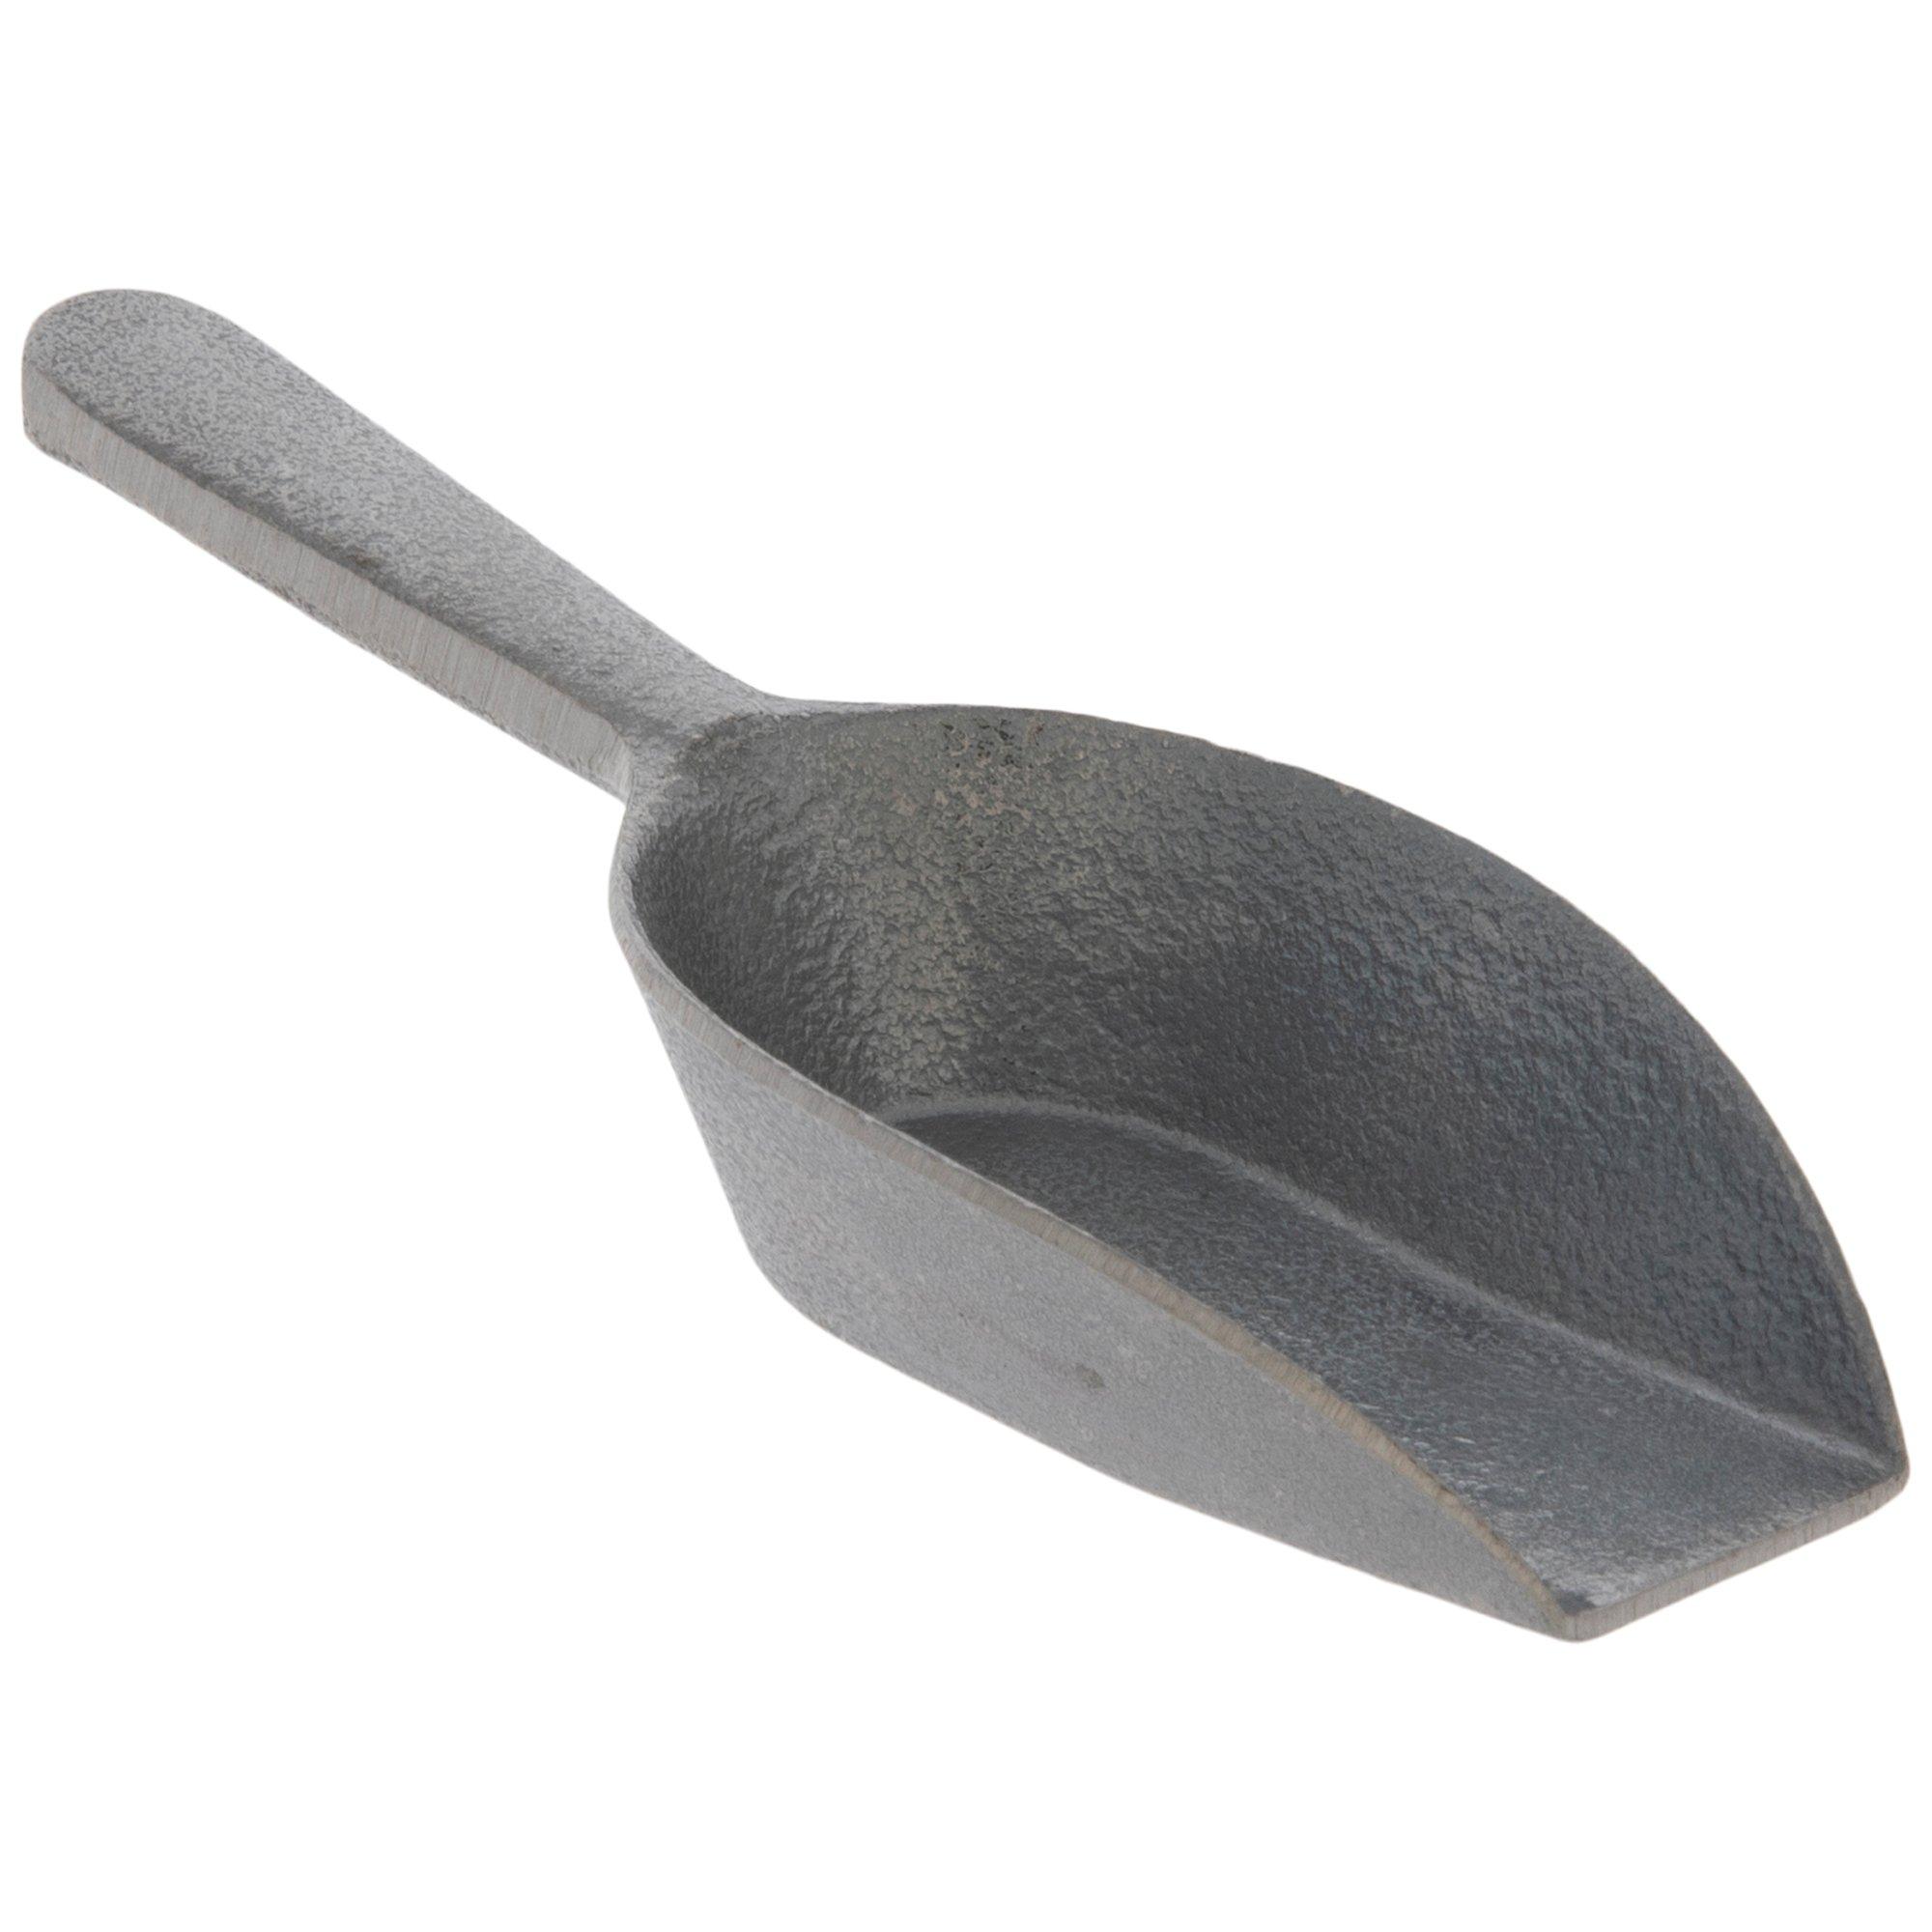 HIC 7.5 Flat Bottom Food Utility Scoop – The Cook's Nook